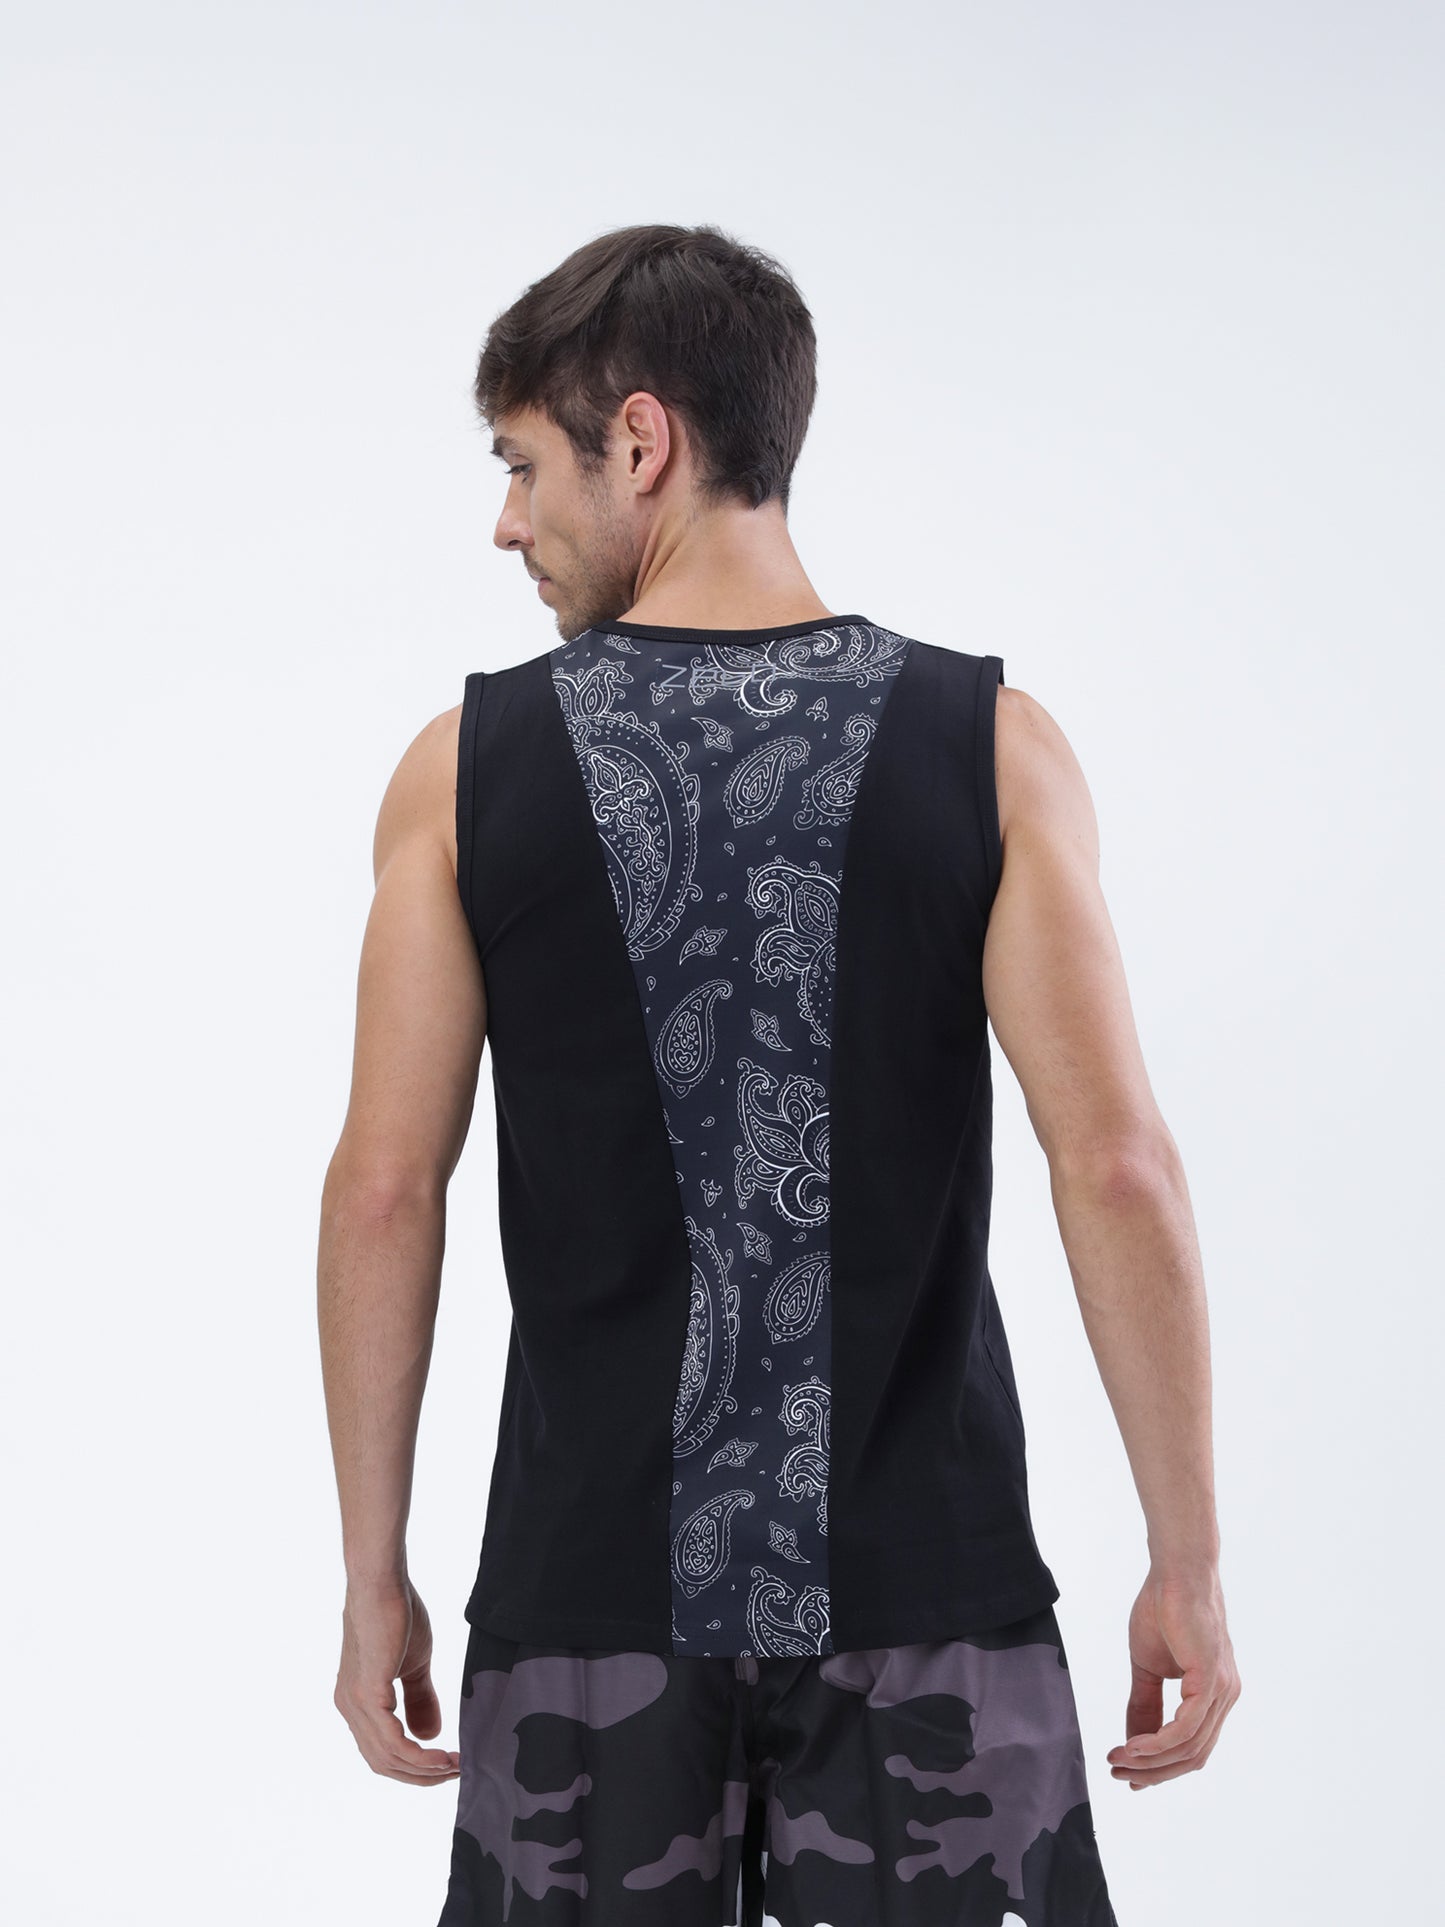 Cotton Sleeveless training top with printed back panel - Zebo Active Wear